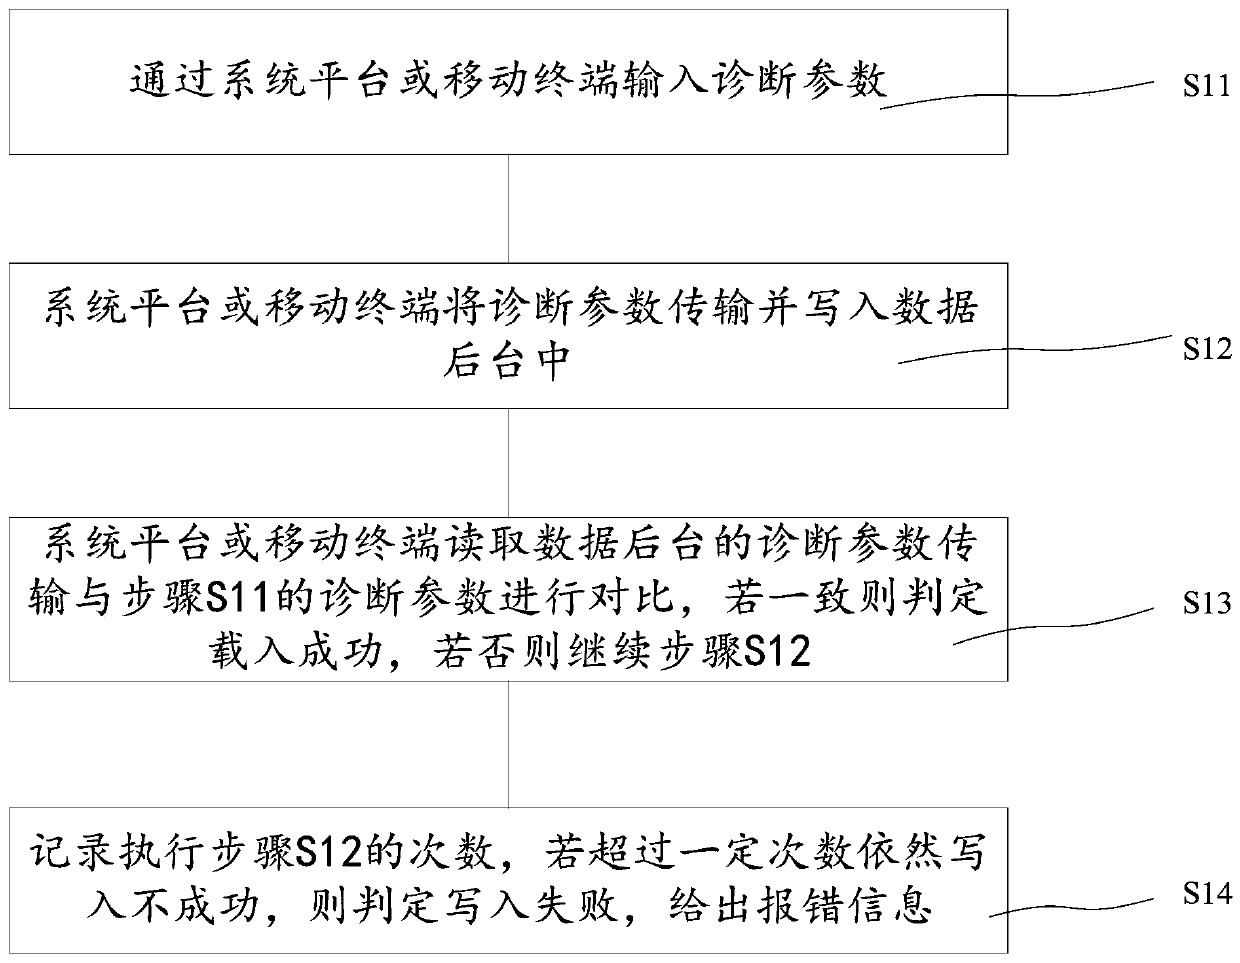 Battery performance remote diagnosis system and battery performance remote diagnosis method